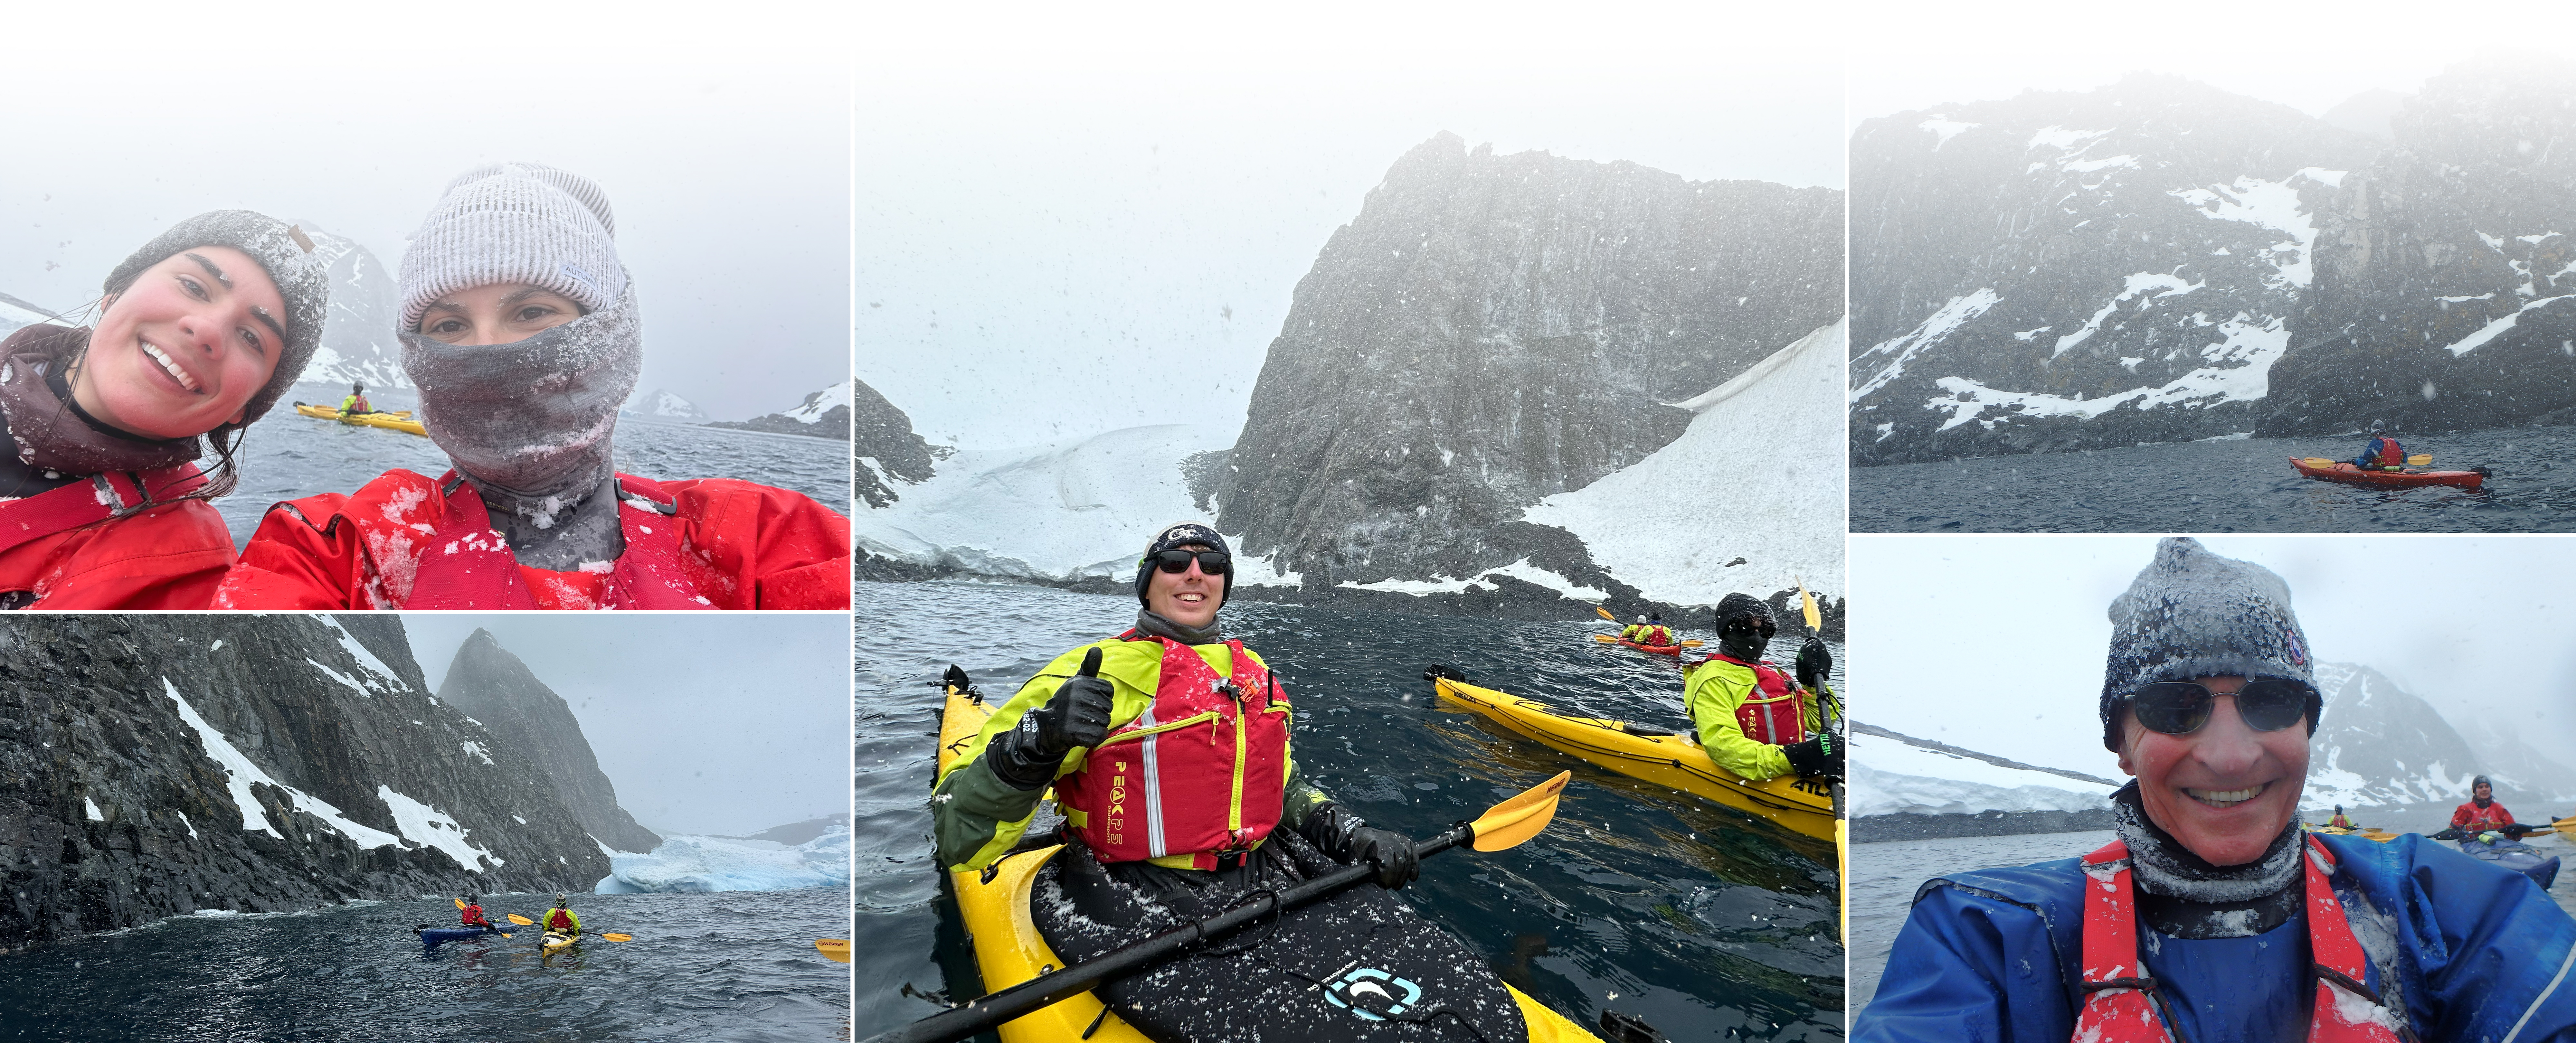 Collage of images from kayaking in the snow on Christmas Day.